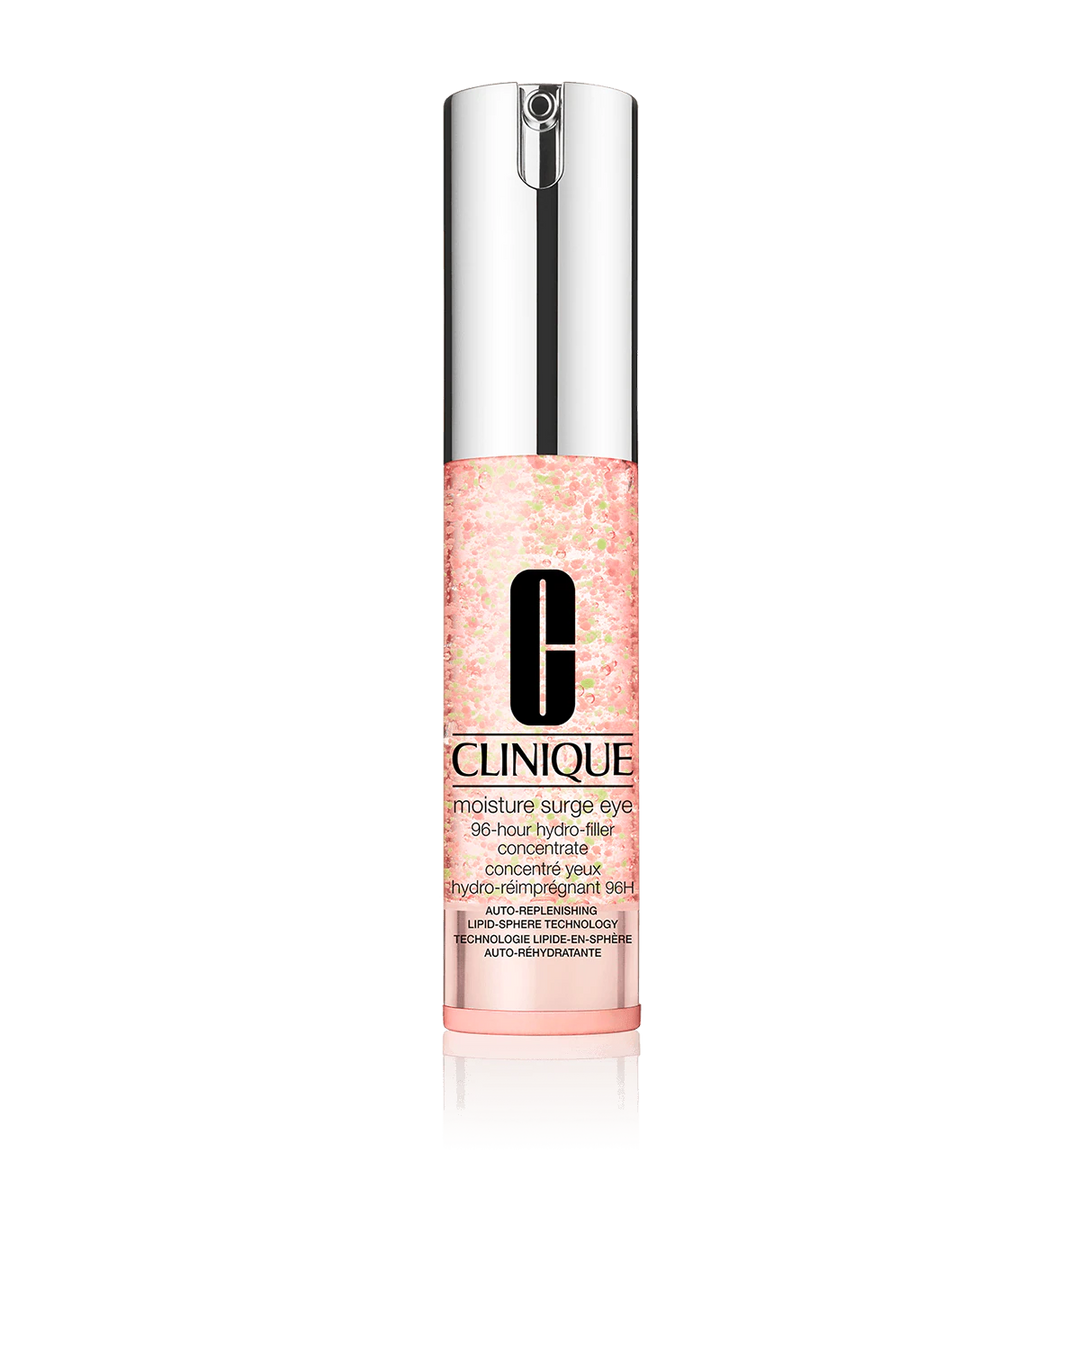 Shop The Latest Collection Of Clinique Moisture Surge Eye 96-Hour Hydro-Filler Concentrate In Lebanon